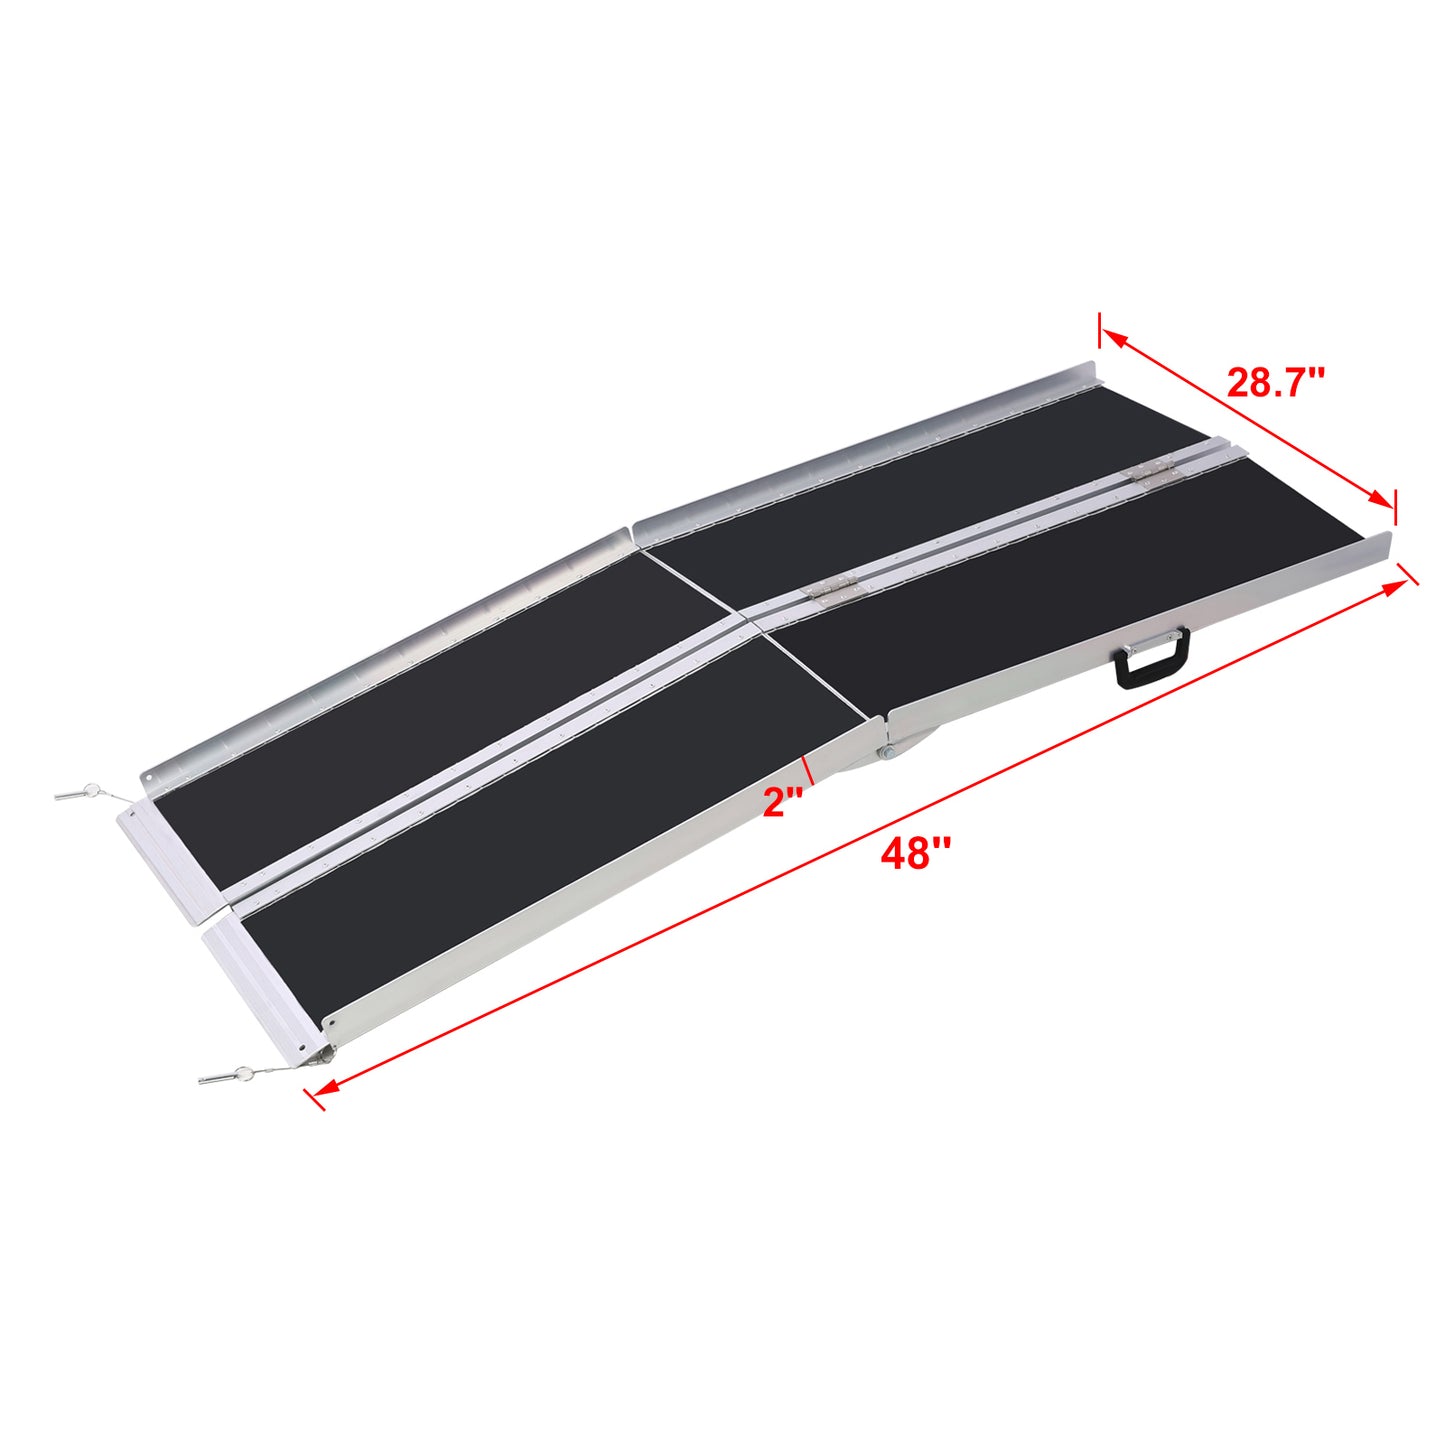 wheel chair ramp 4ft ,aluminium threhold ramp,Portable and Foldable, 600 Pound Capacity, Non-Skid Surface, Two Separate Pieces, for Home, Steps, Stairs, Doorways